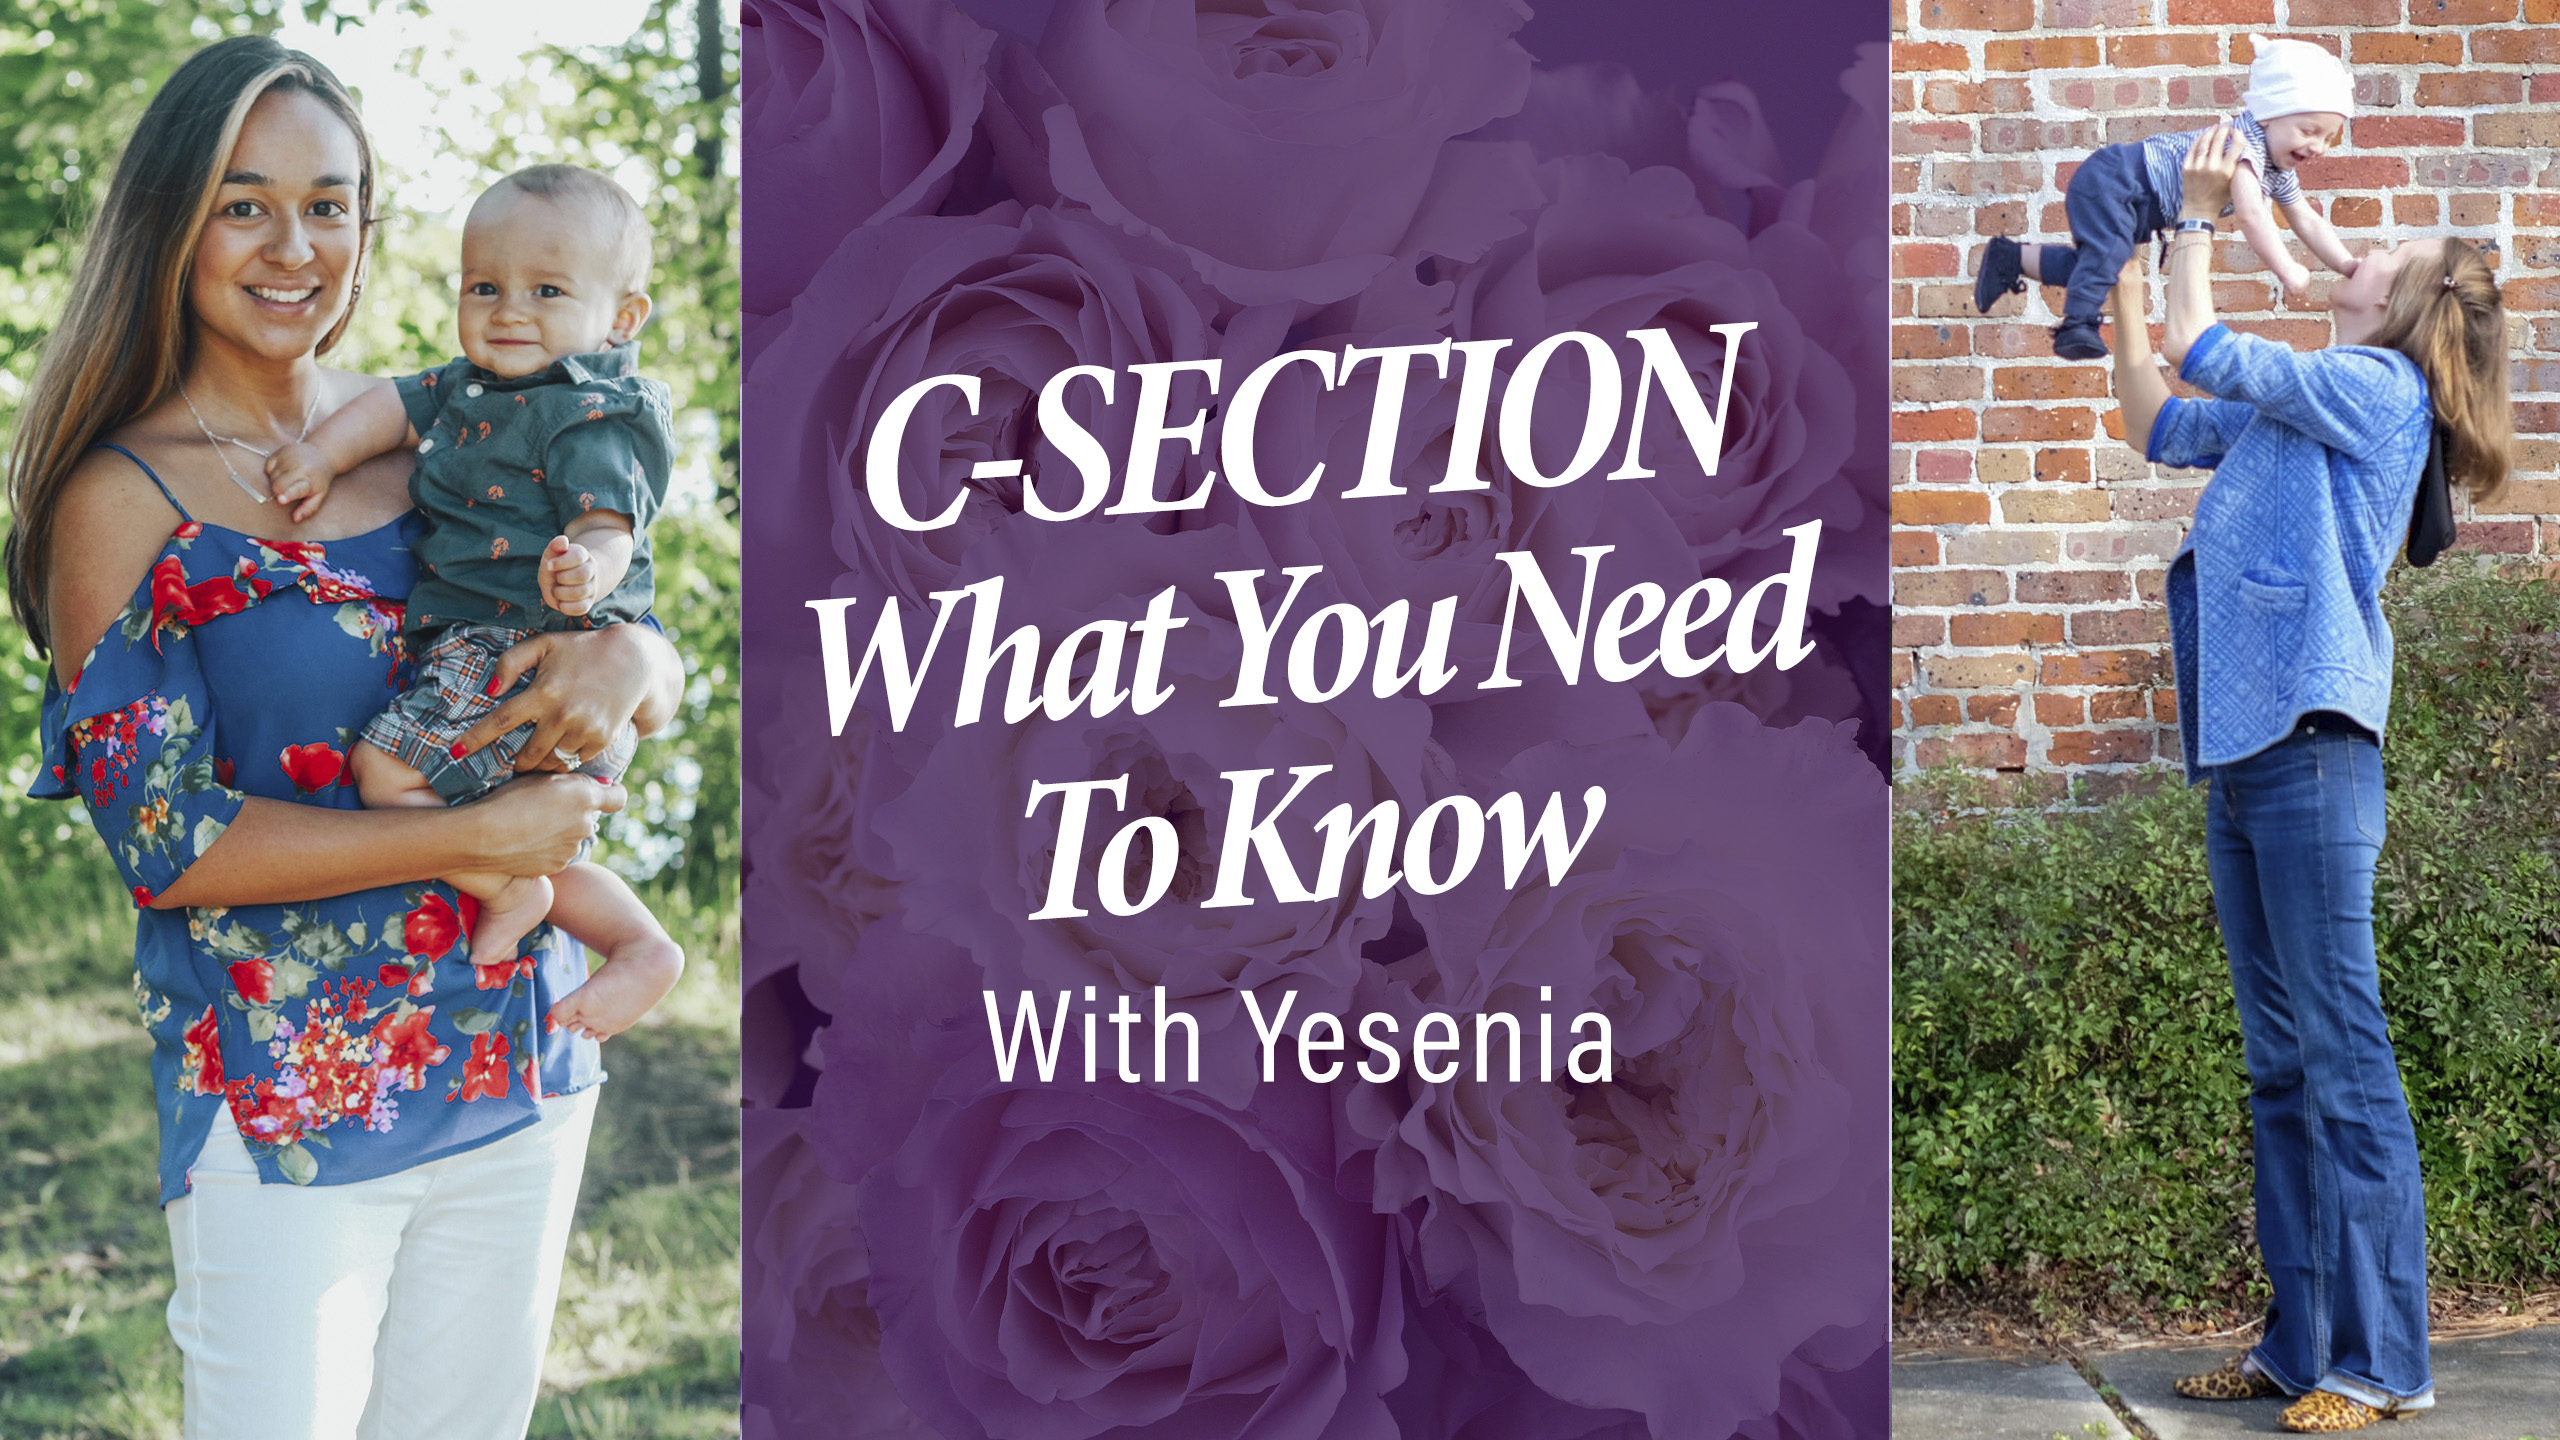 C Section What You Need to Know